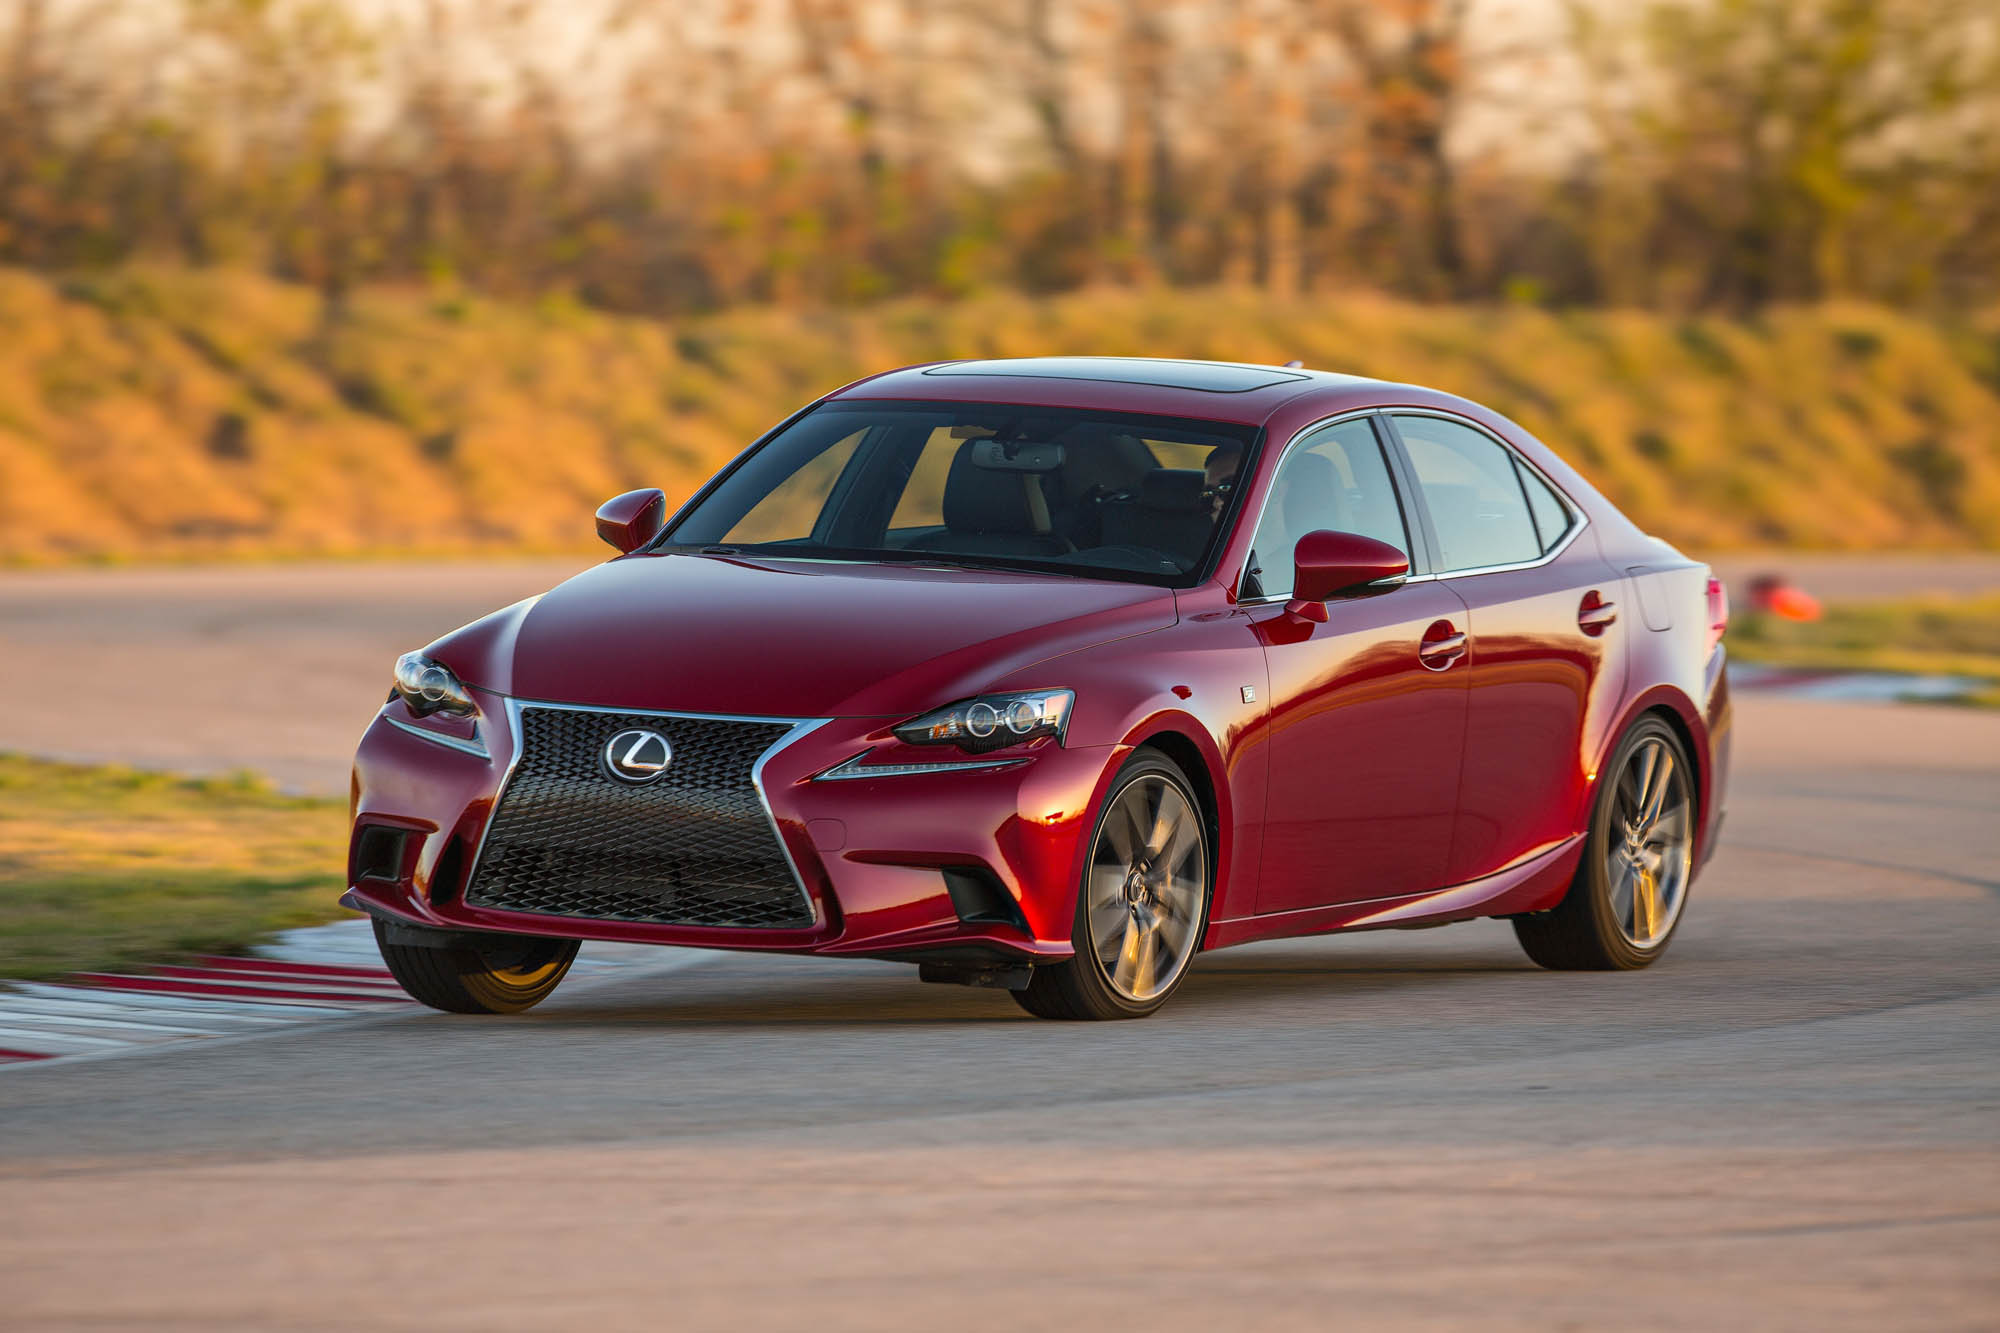 2014 Lexus IS first drive review